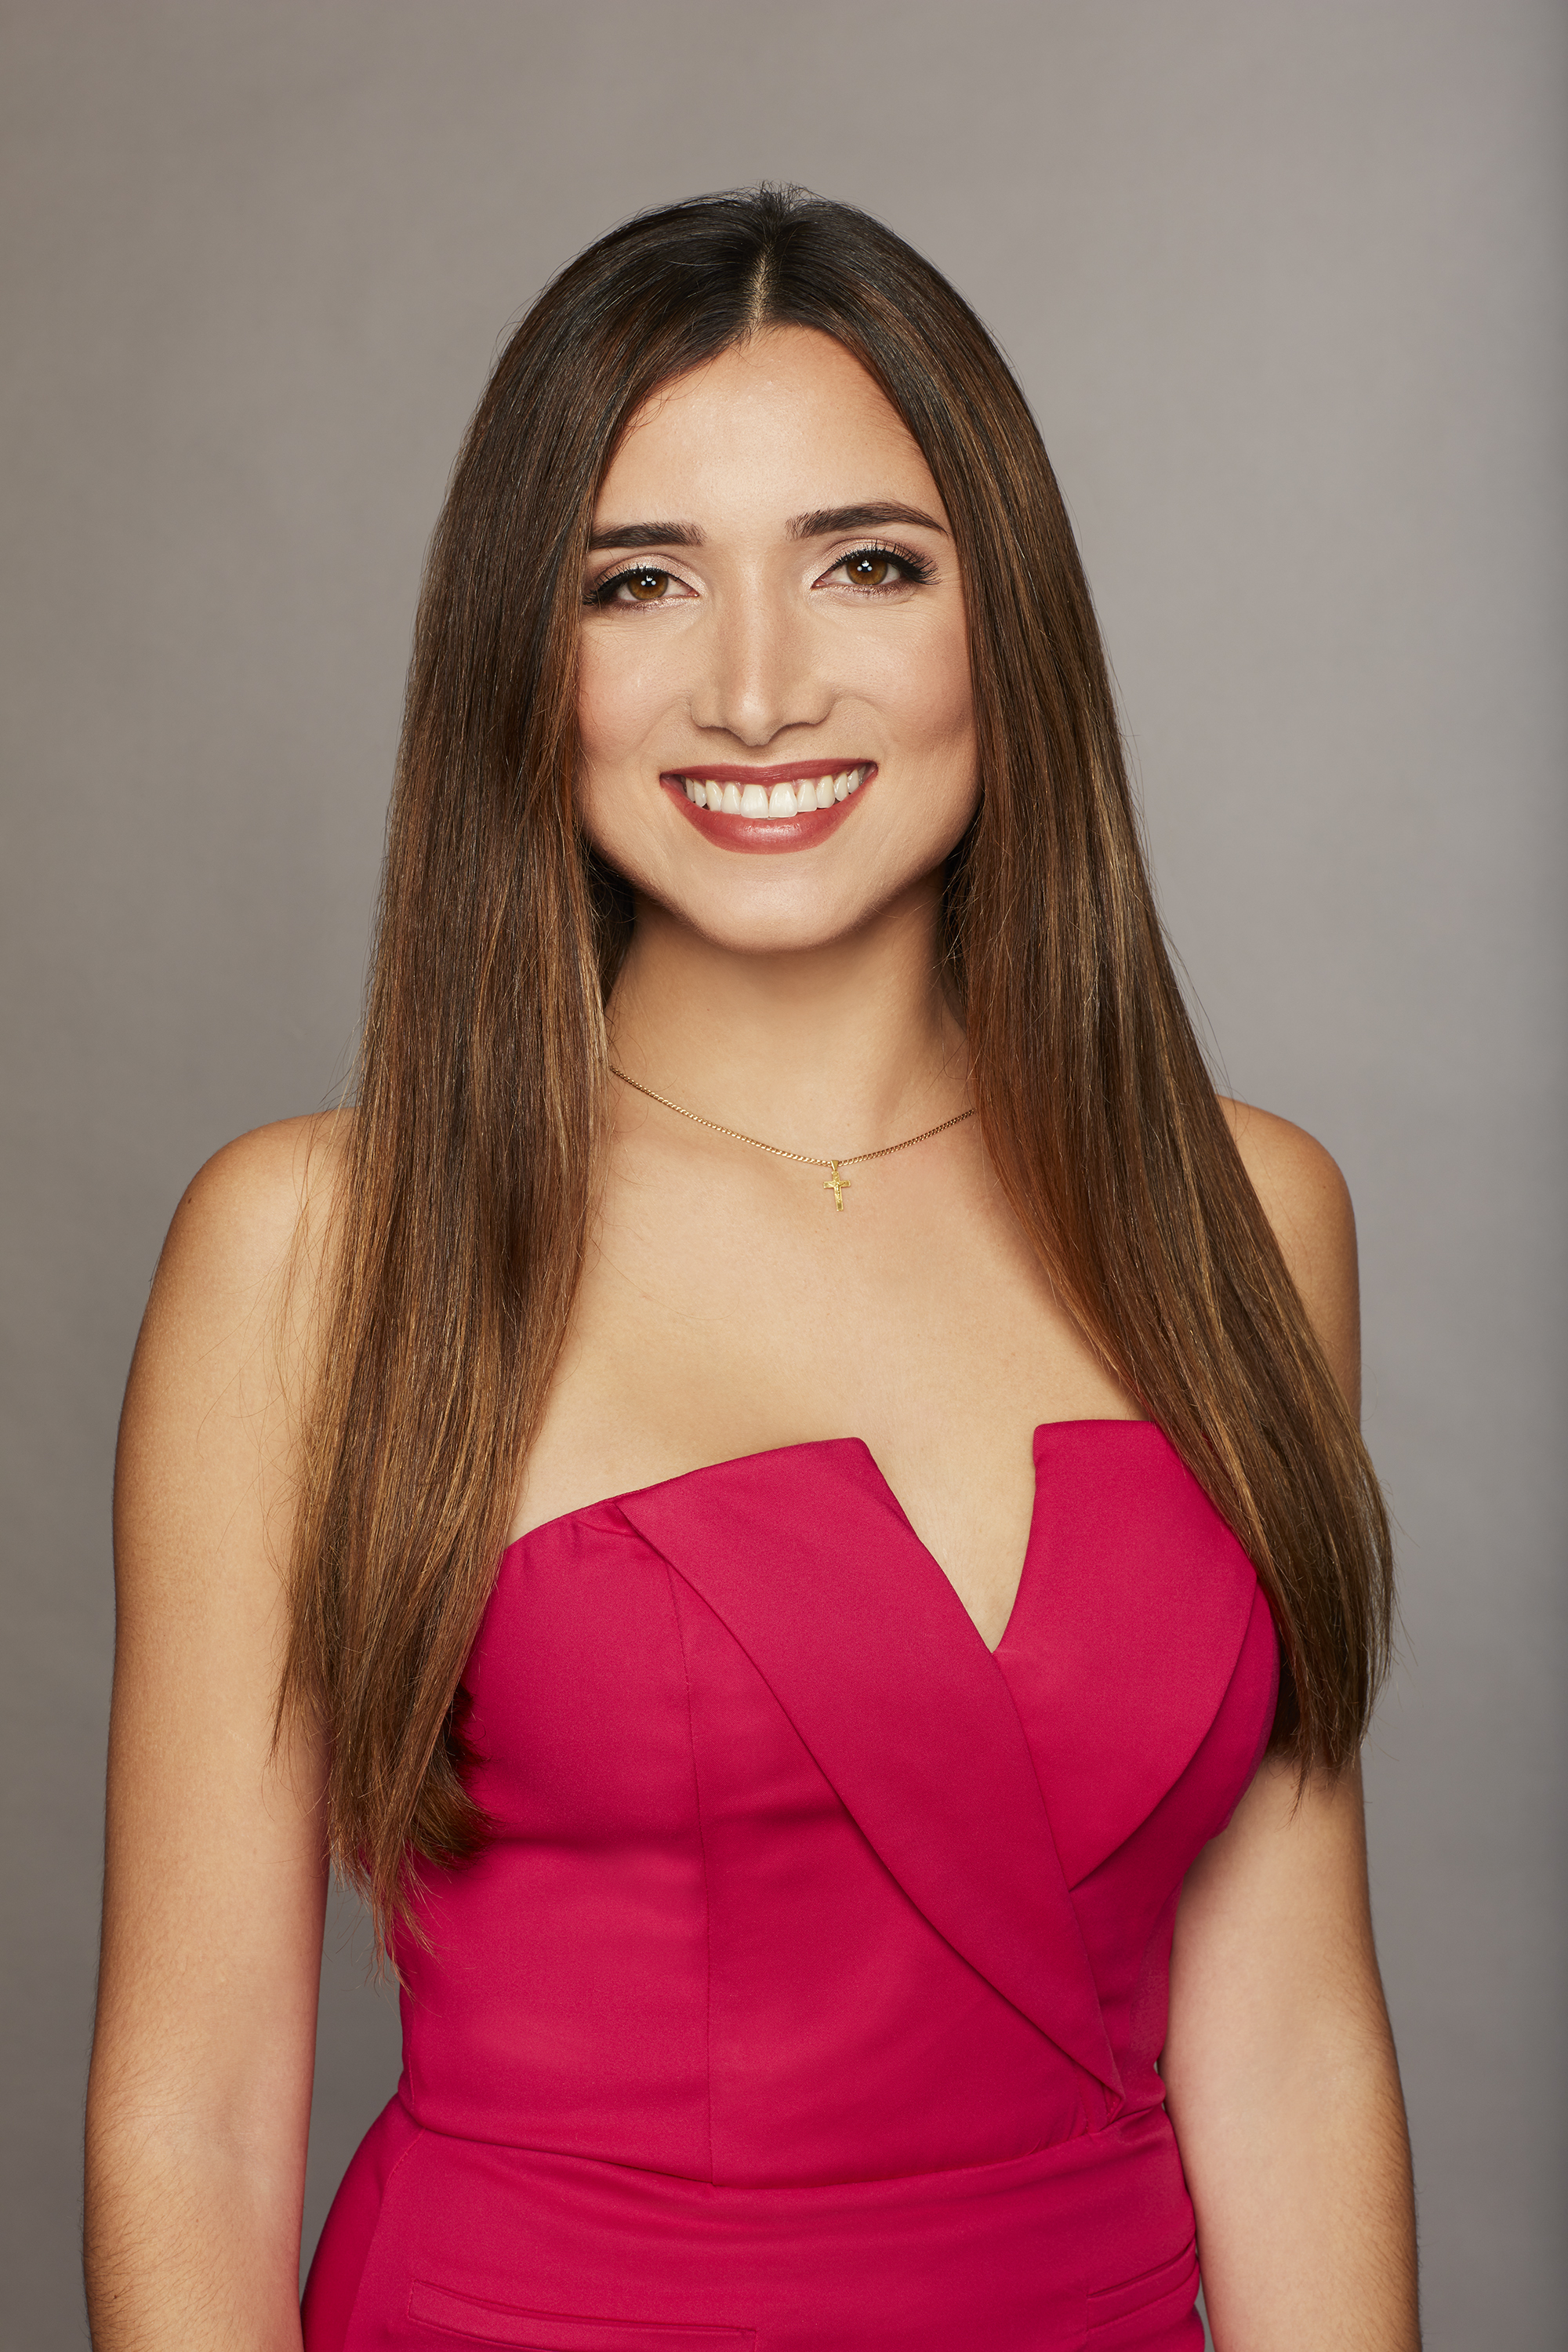 The Bachelor 2019 Spoilers – Week 5 Results – Nicole